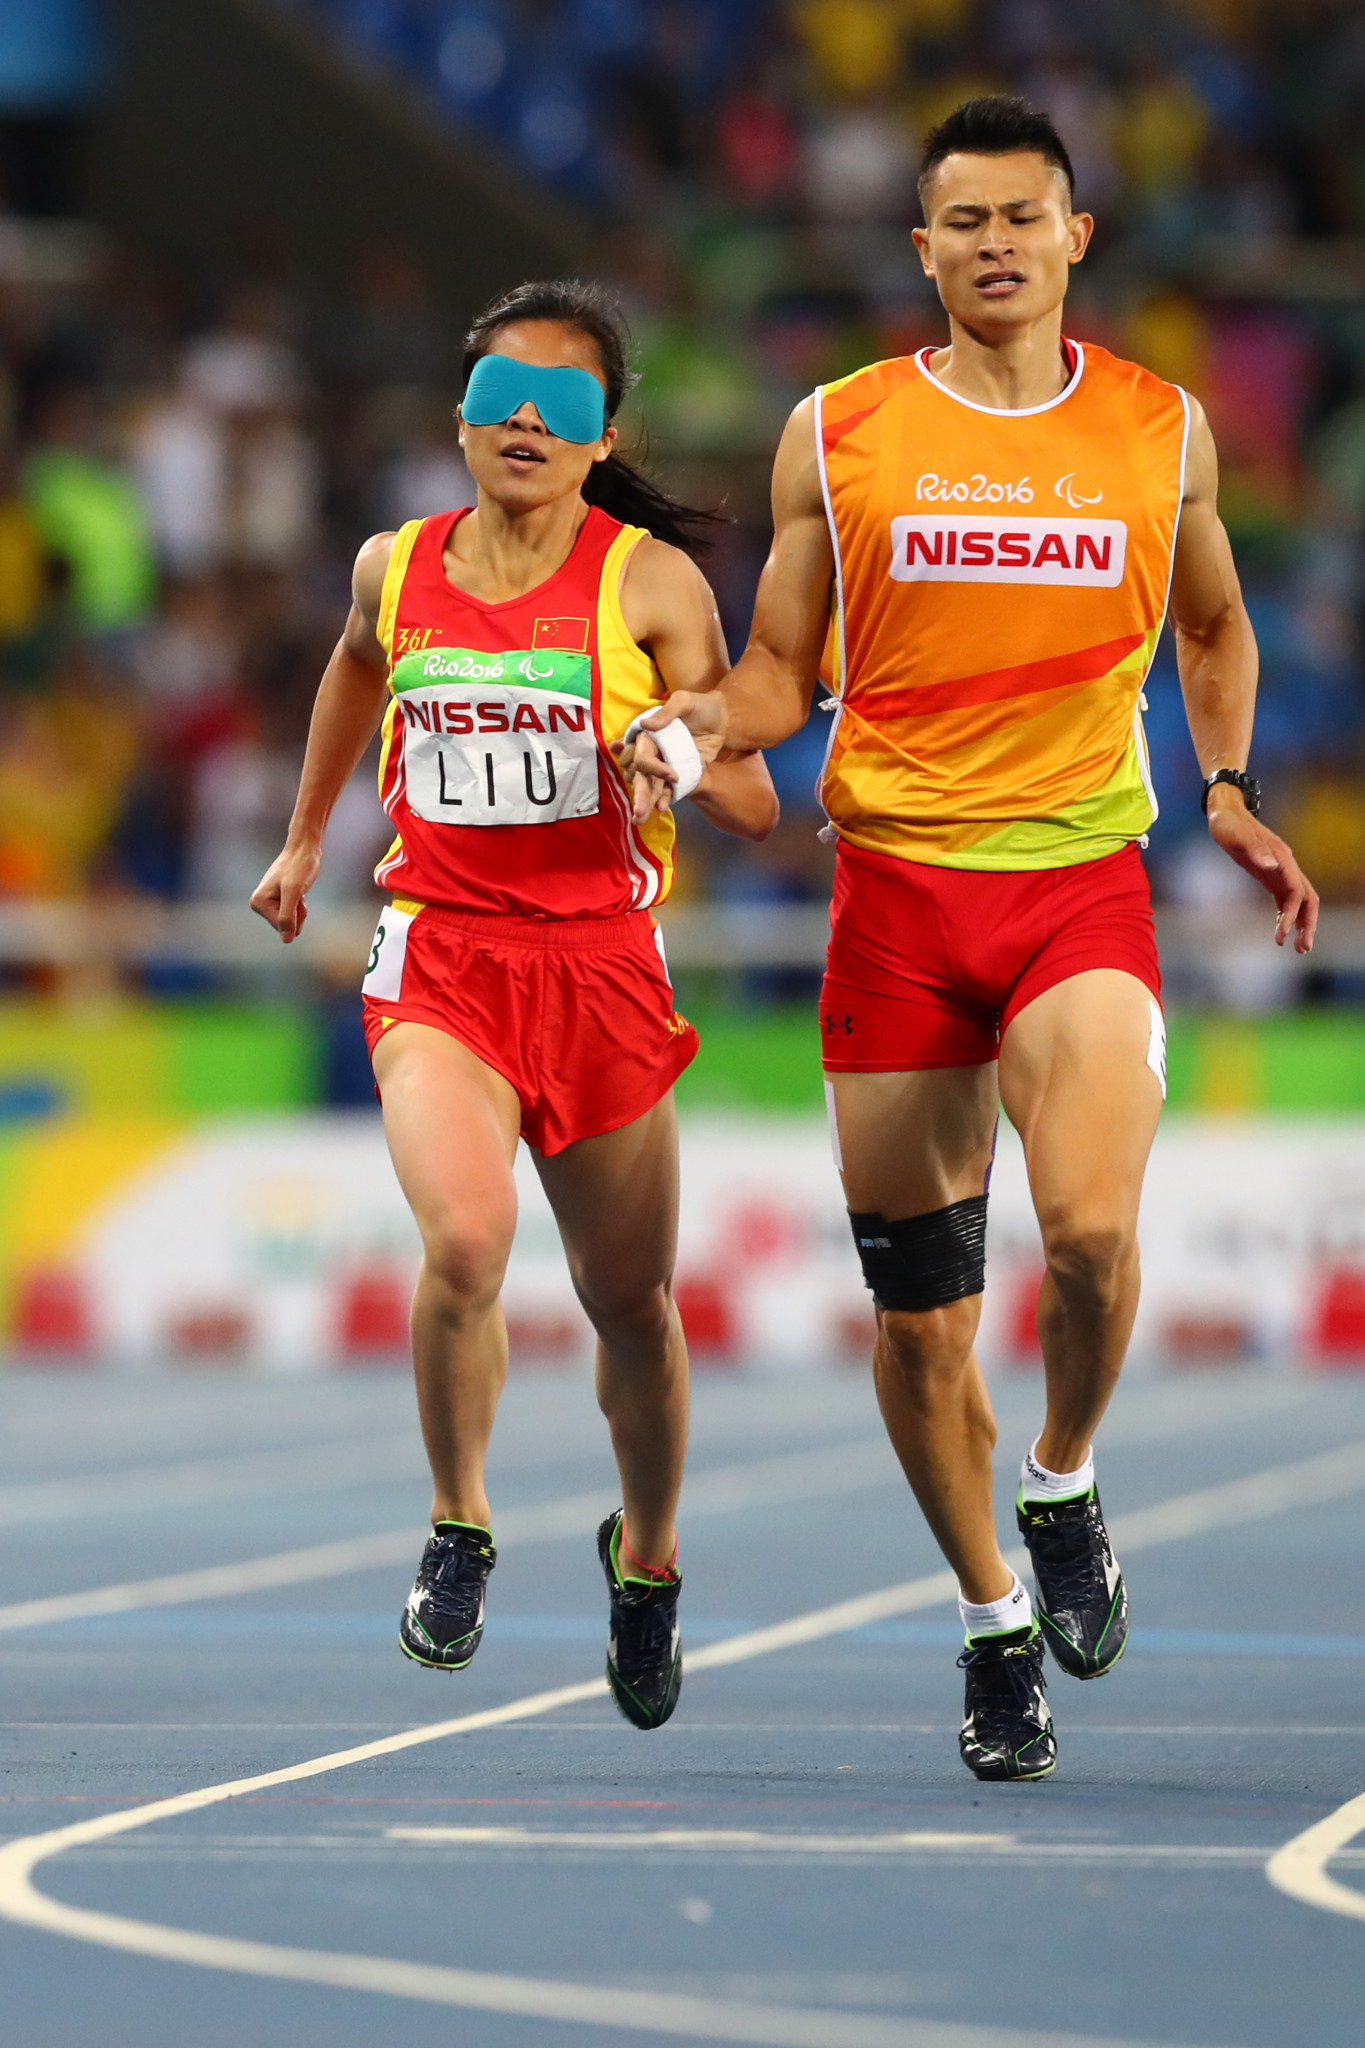  Cuiqing beats Zhou in 100m action replay at World Para Athletics Grand Prix in Beijing